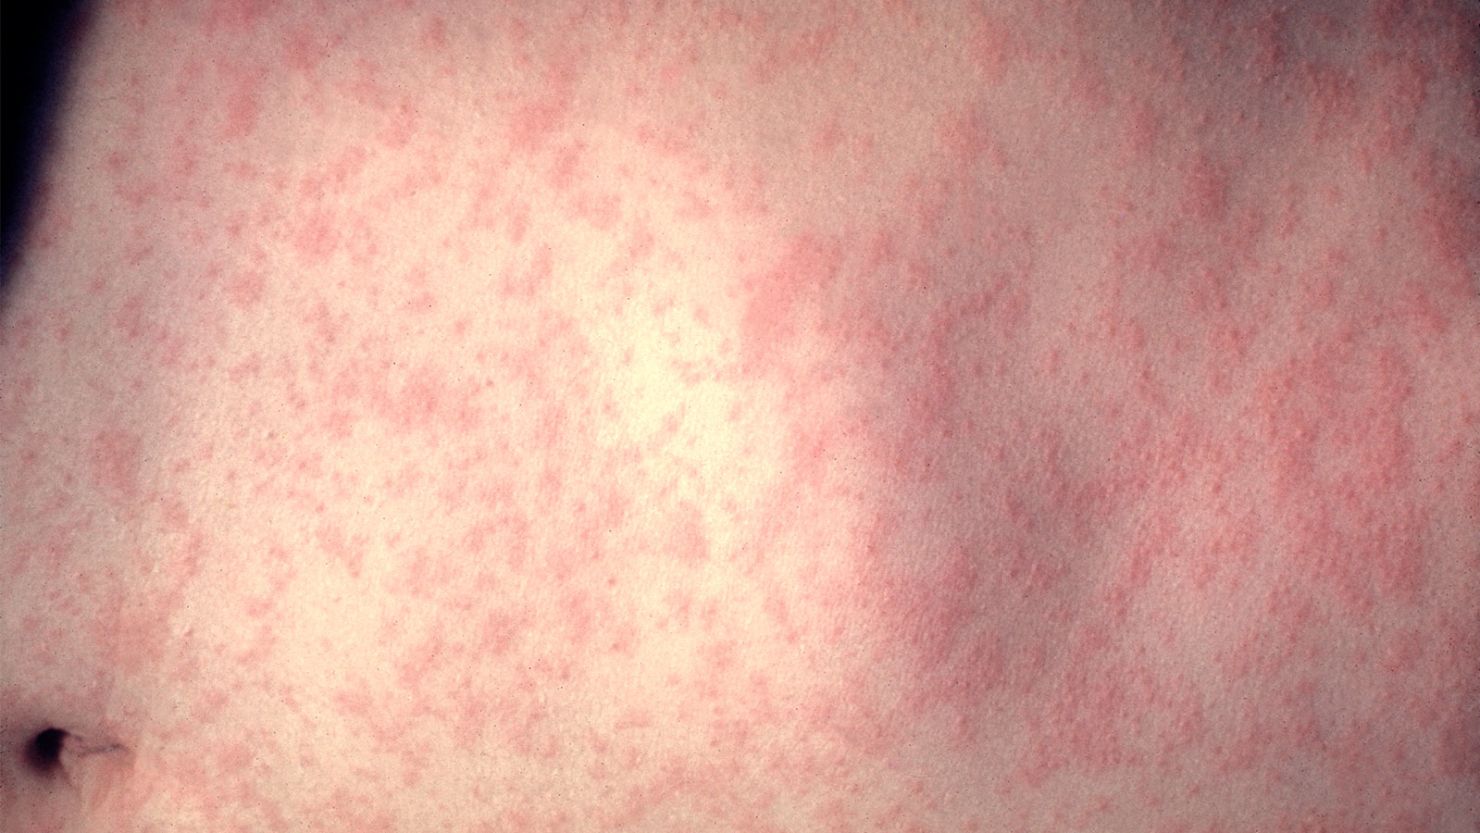 The US has had 128 measles cases reported in 20 jurisdictions this year, the CDC says.